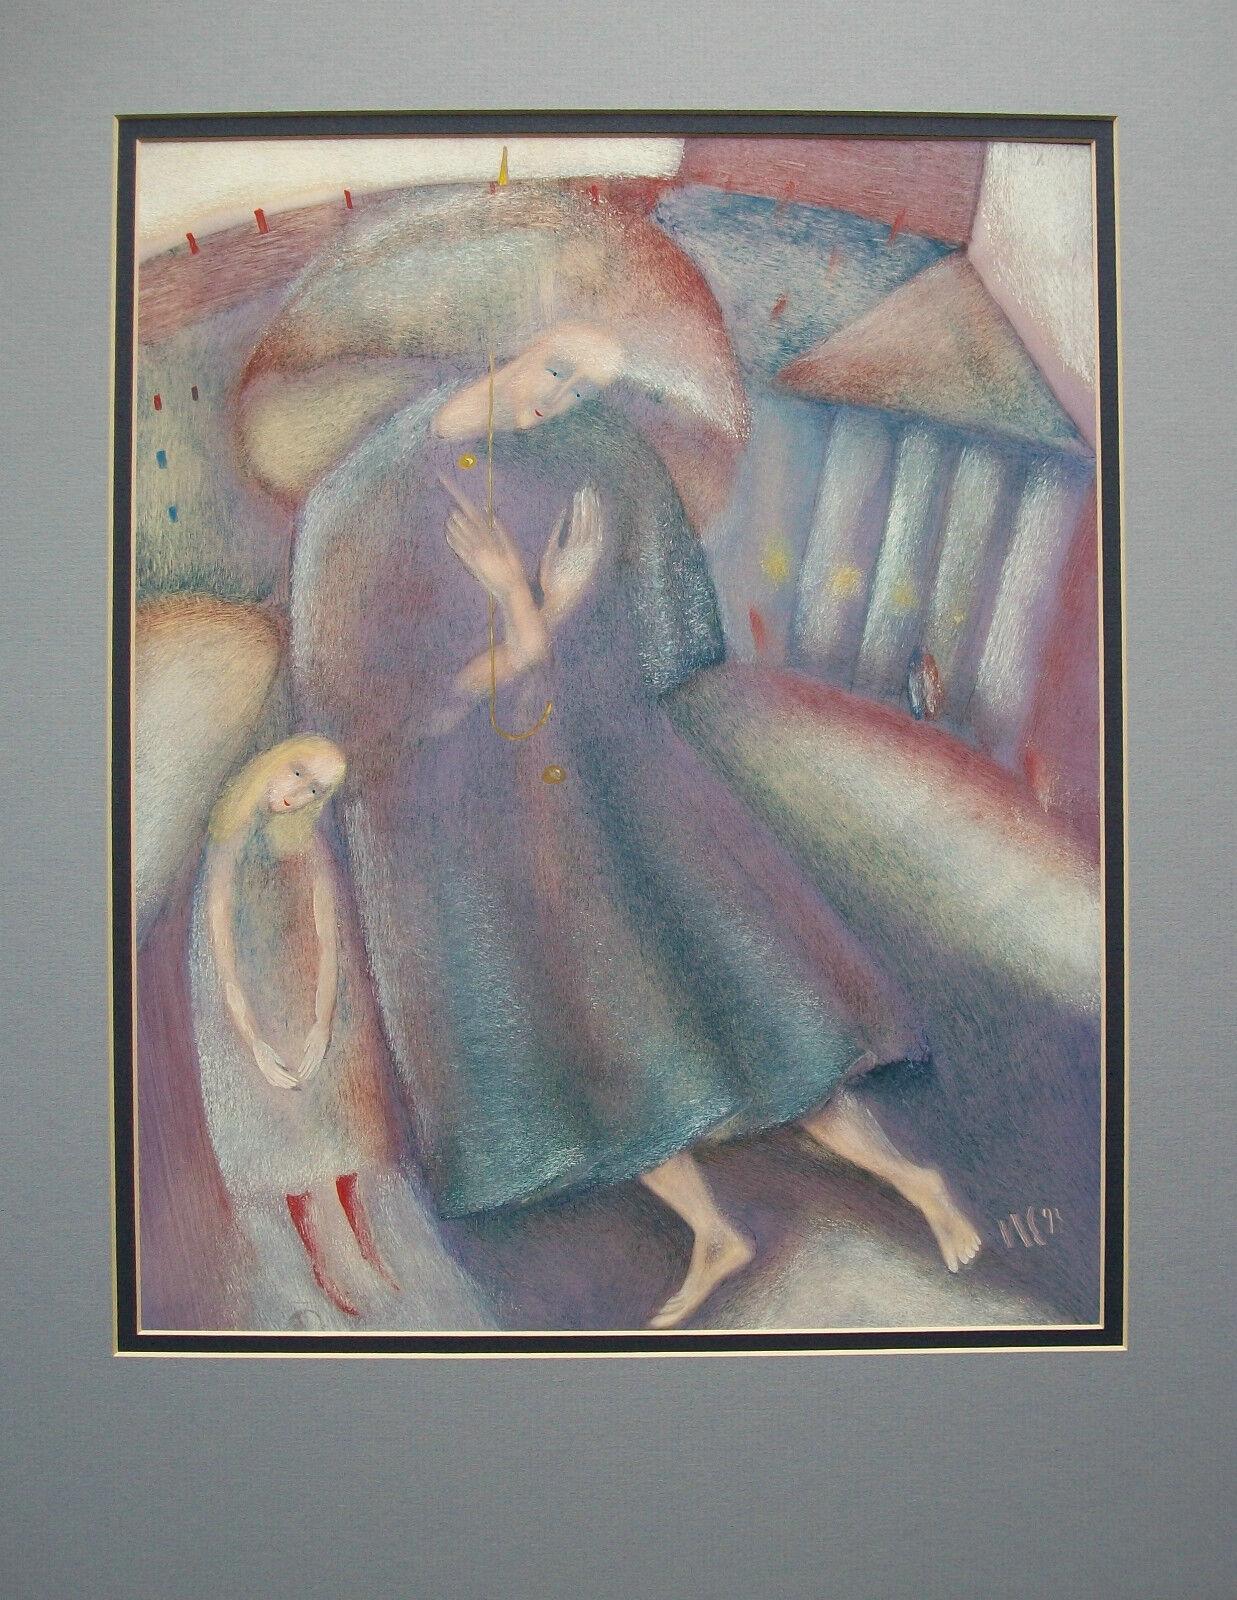 Expressionist Mixed Media Painting on Paper, Initialed, Unframed, Circa 1993 For Sale 4